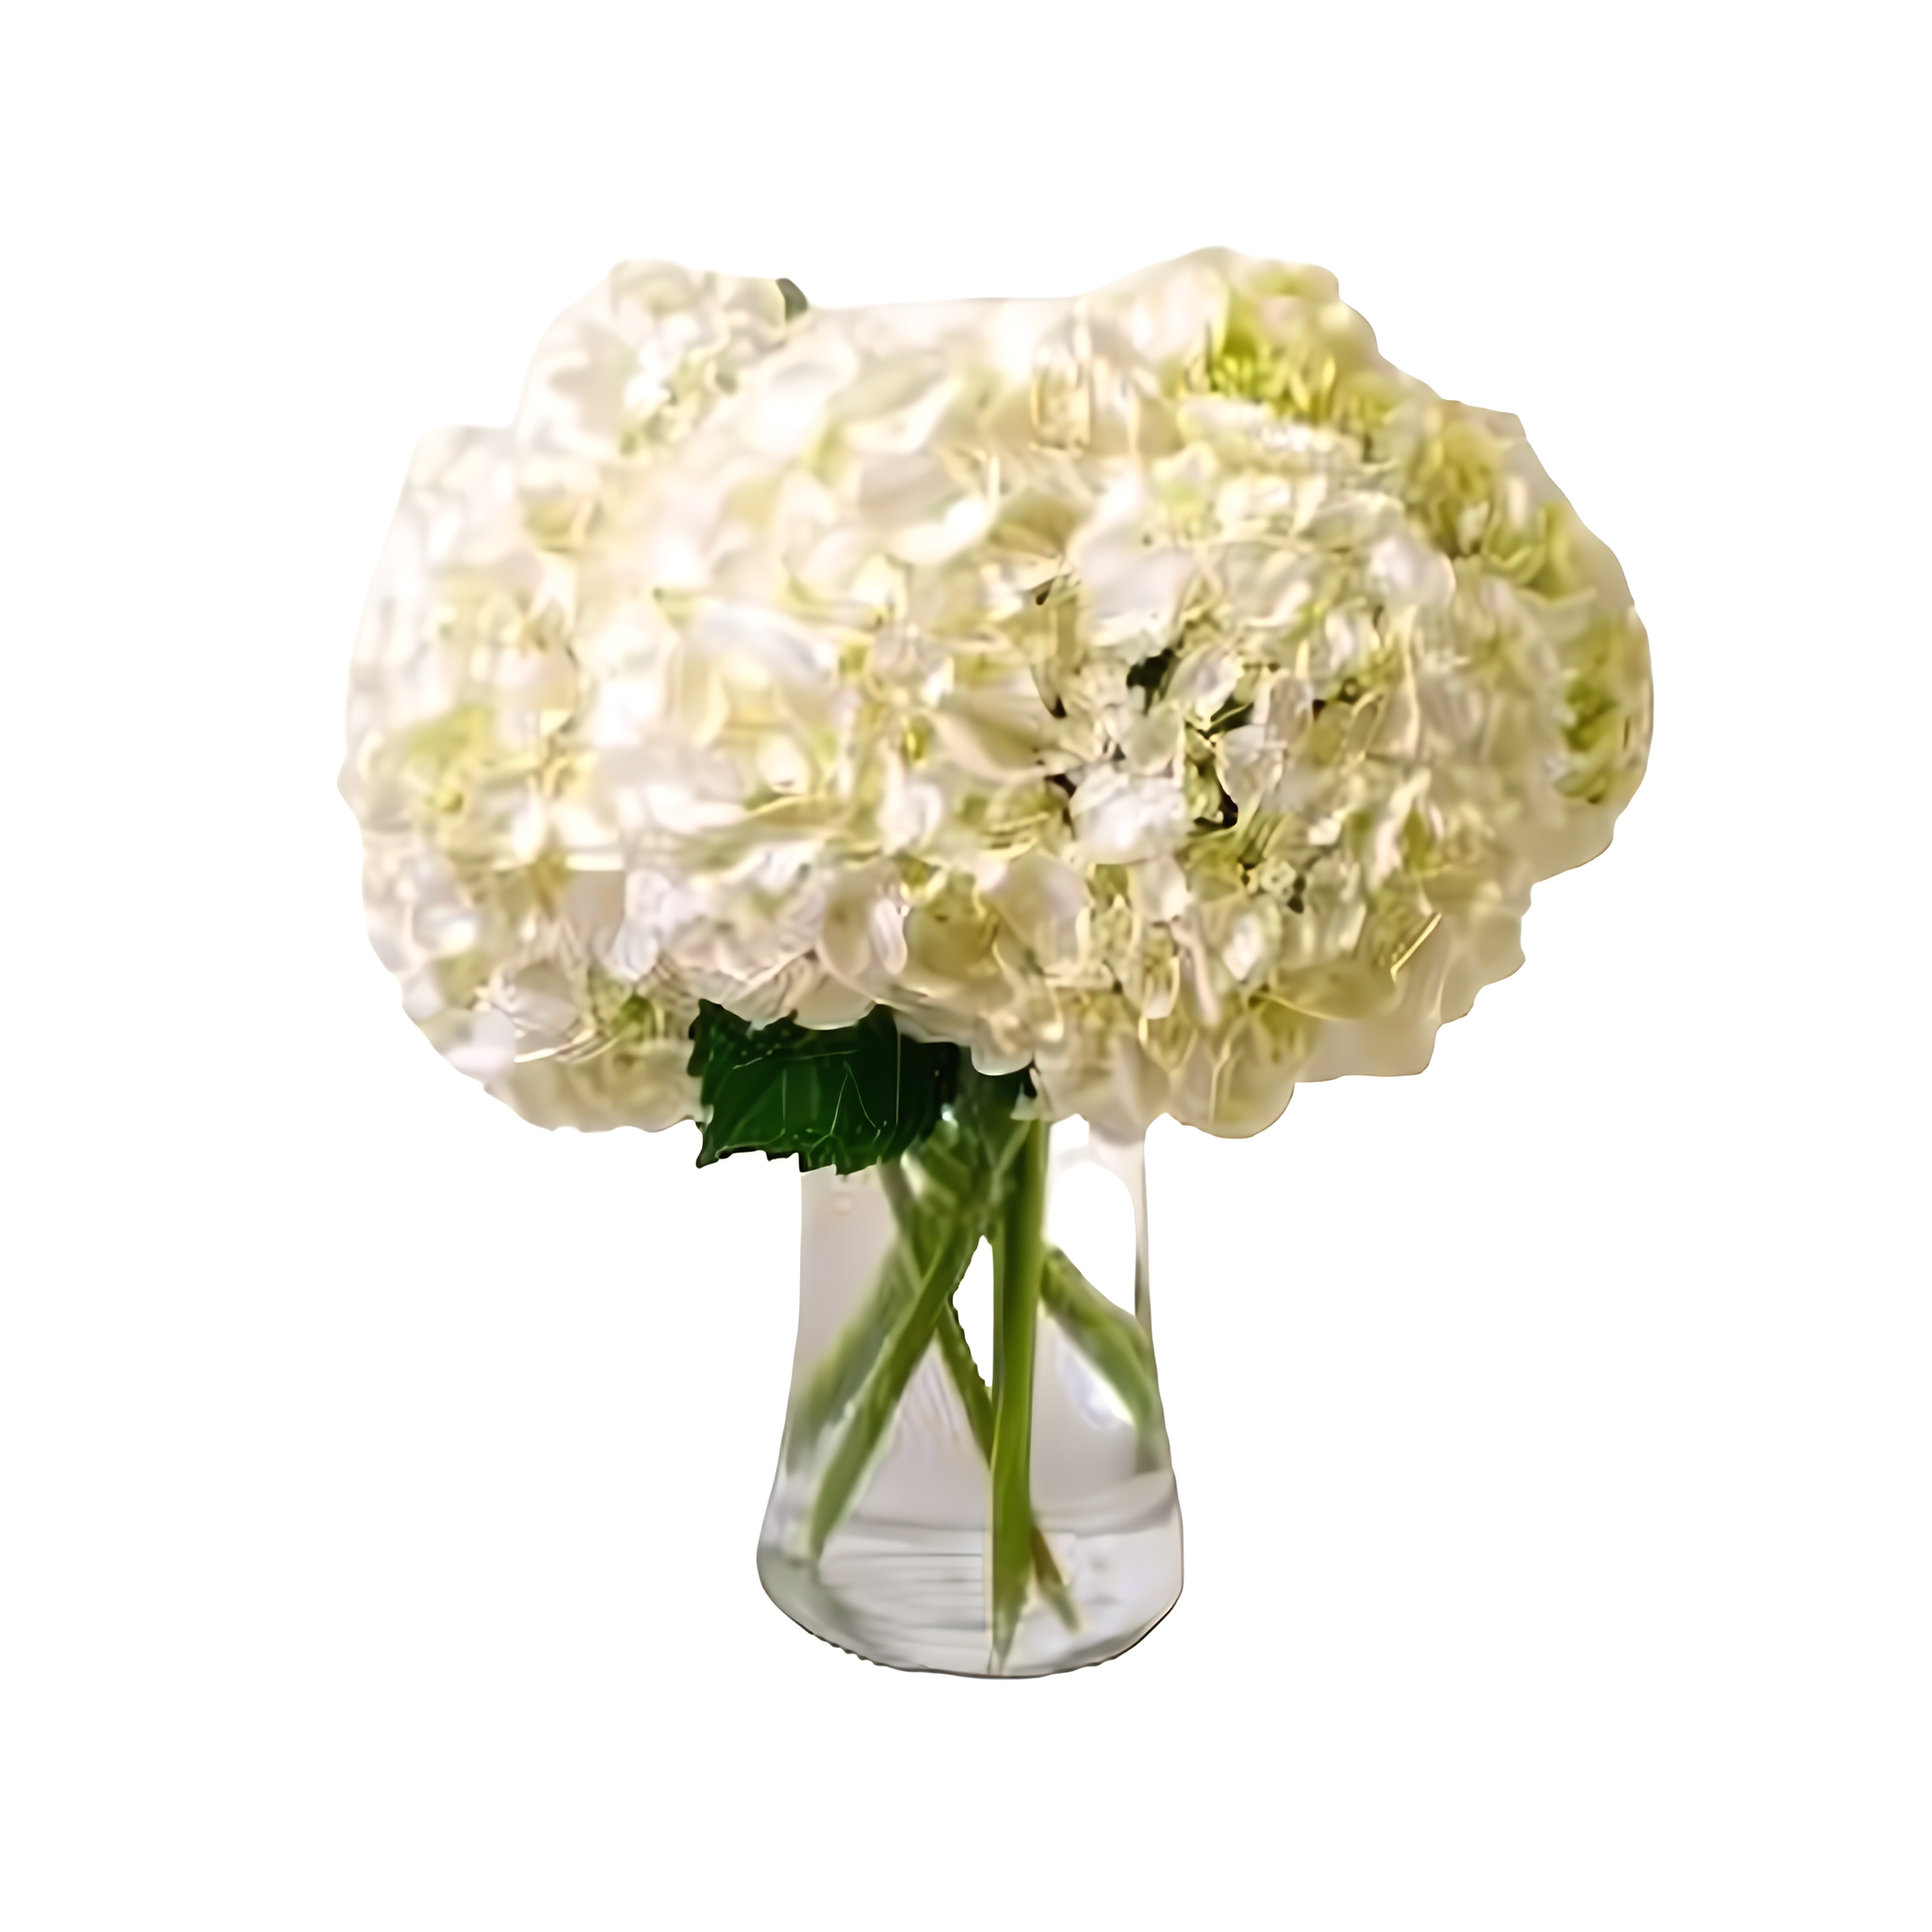 NYC Flower Delivery - Fluffy Hydrangea Bouquet - Occasions > Anniversary